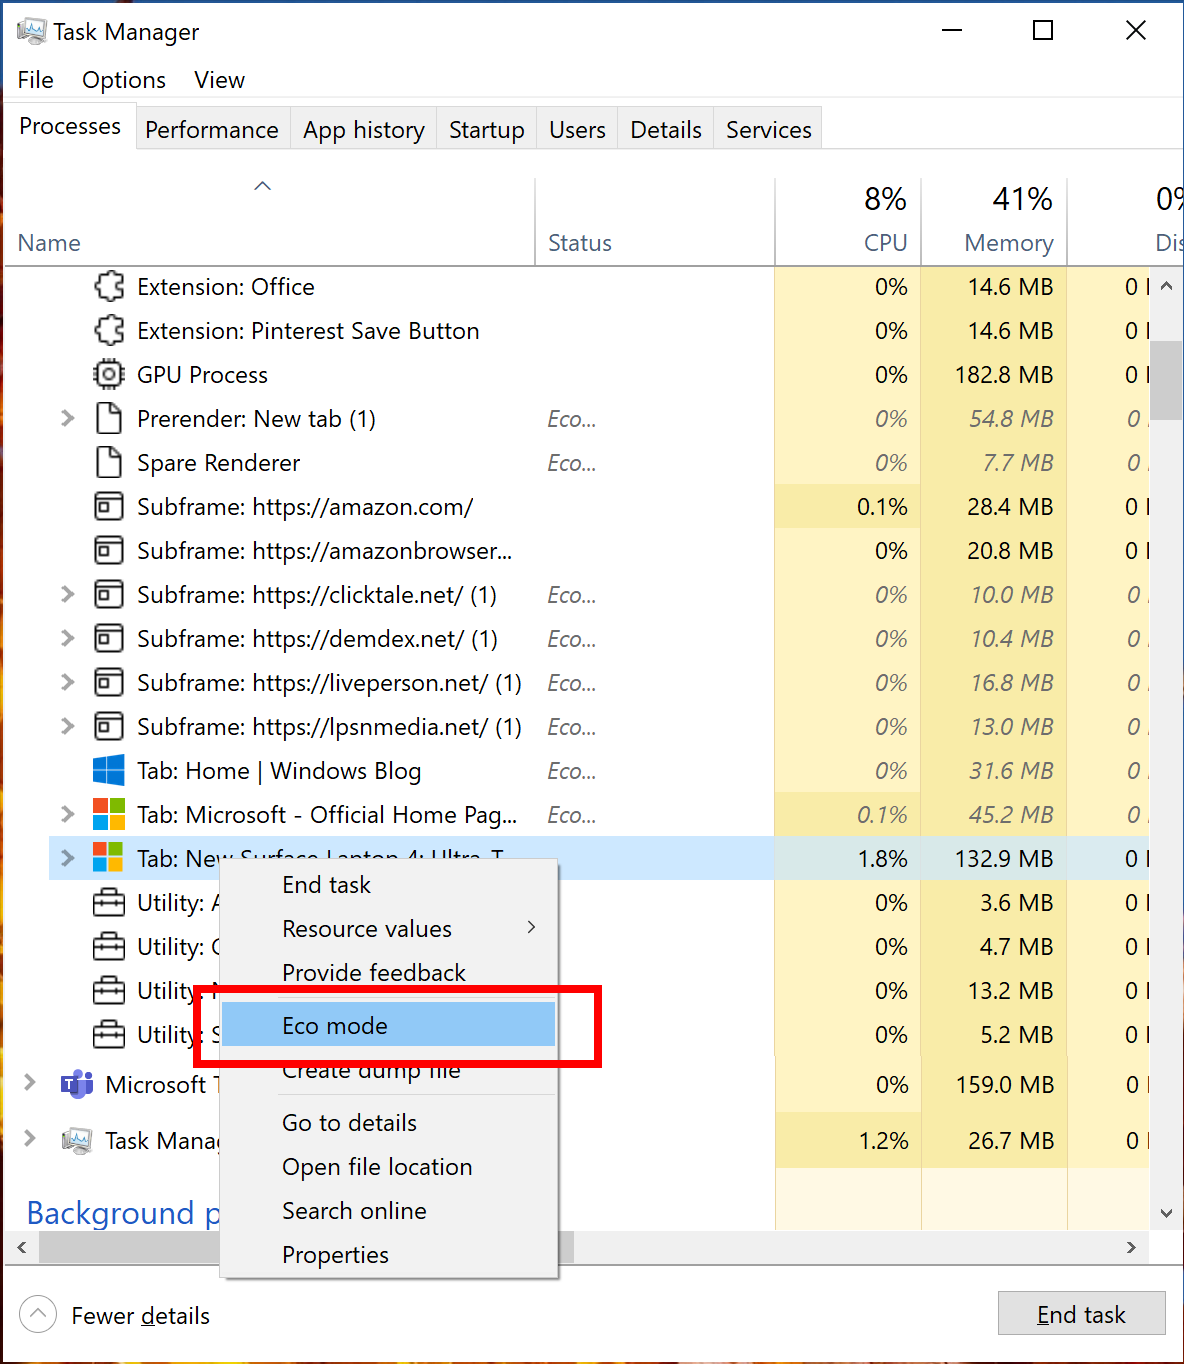 Right-click on child processes in Task Manager to enable “Eco mode”. 